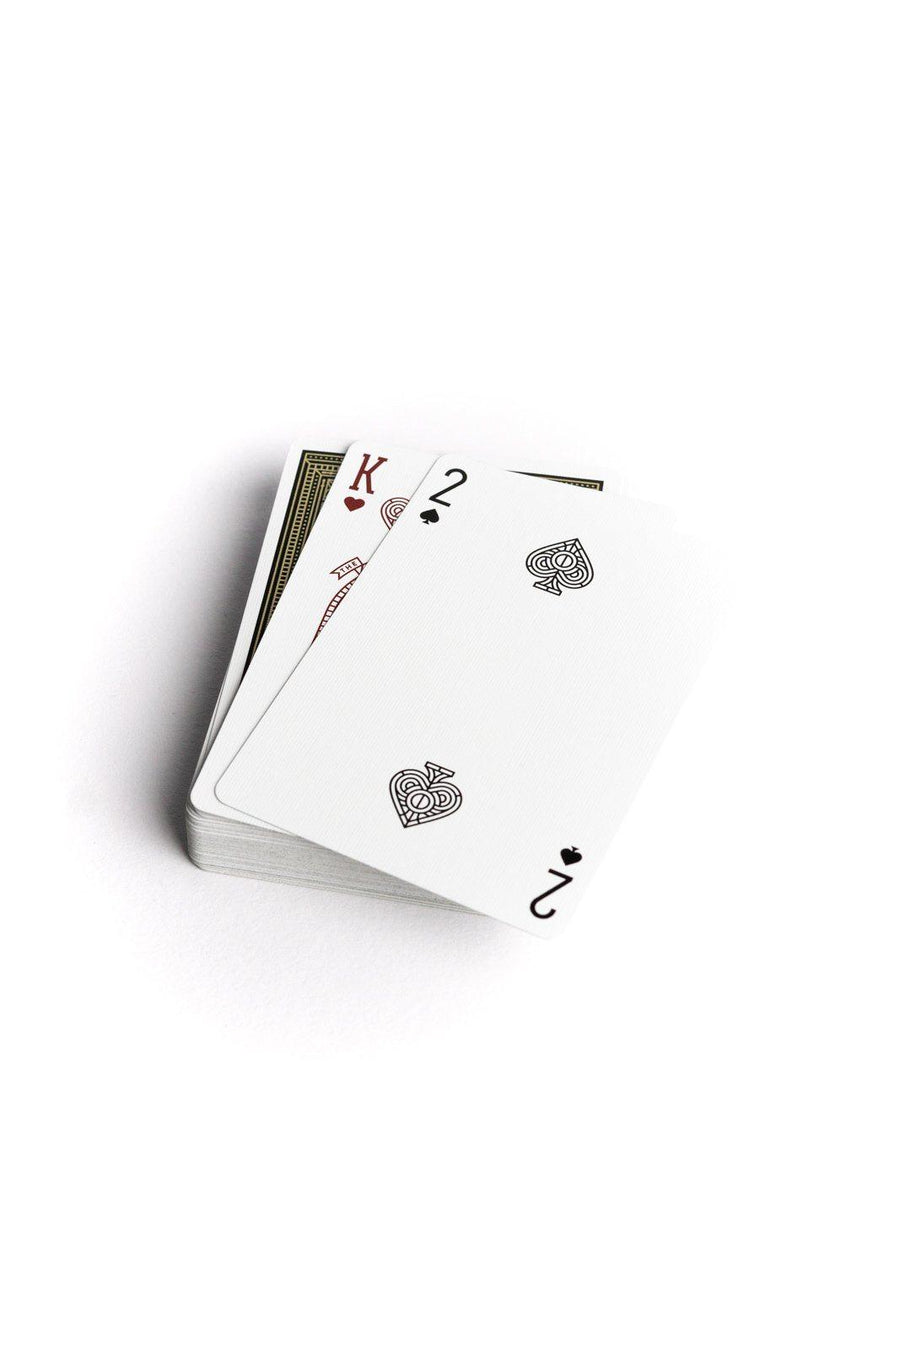 MAKERS: Blacksmith Edition Playing Cards by Dan & Dave